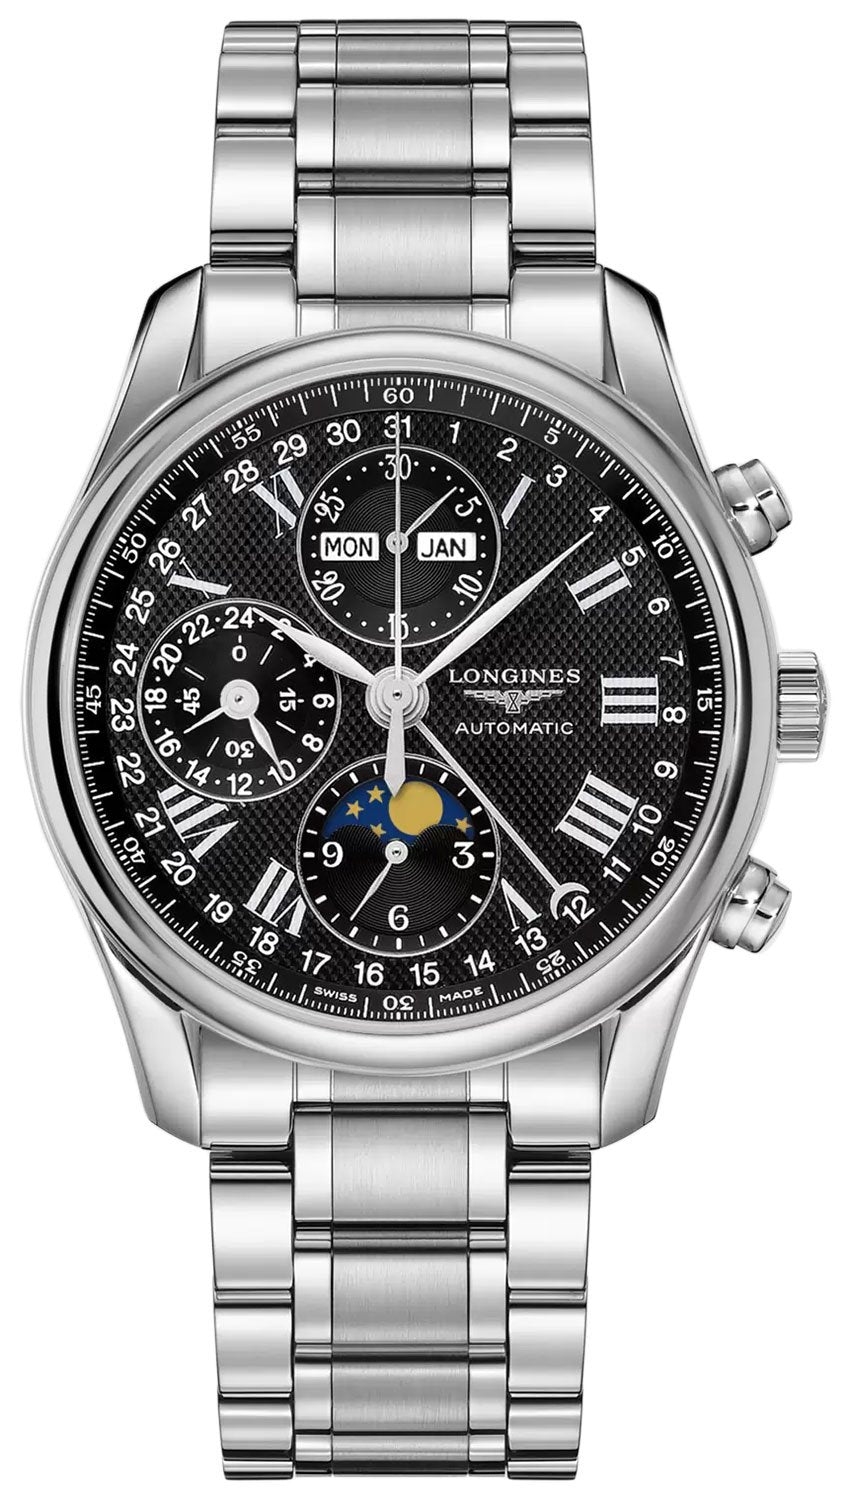 Watches - Mens-Longines-L26734516-12-hour display, 24-hour display, 35 - 40 mm, 40 - 45 mm, black, date, day, Longines, Master Collection, mens, menswatches, moonphase, new arrivals, round, seconds sub-dial, stainless steel band, stainless steel case, swiss automatic, watches-Watches & Beyond